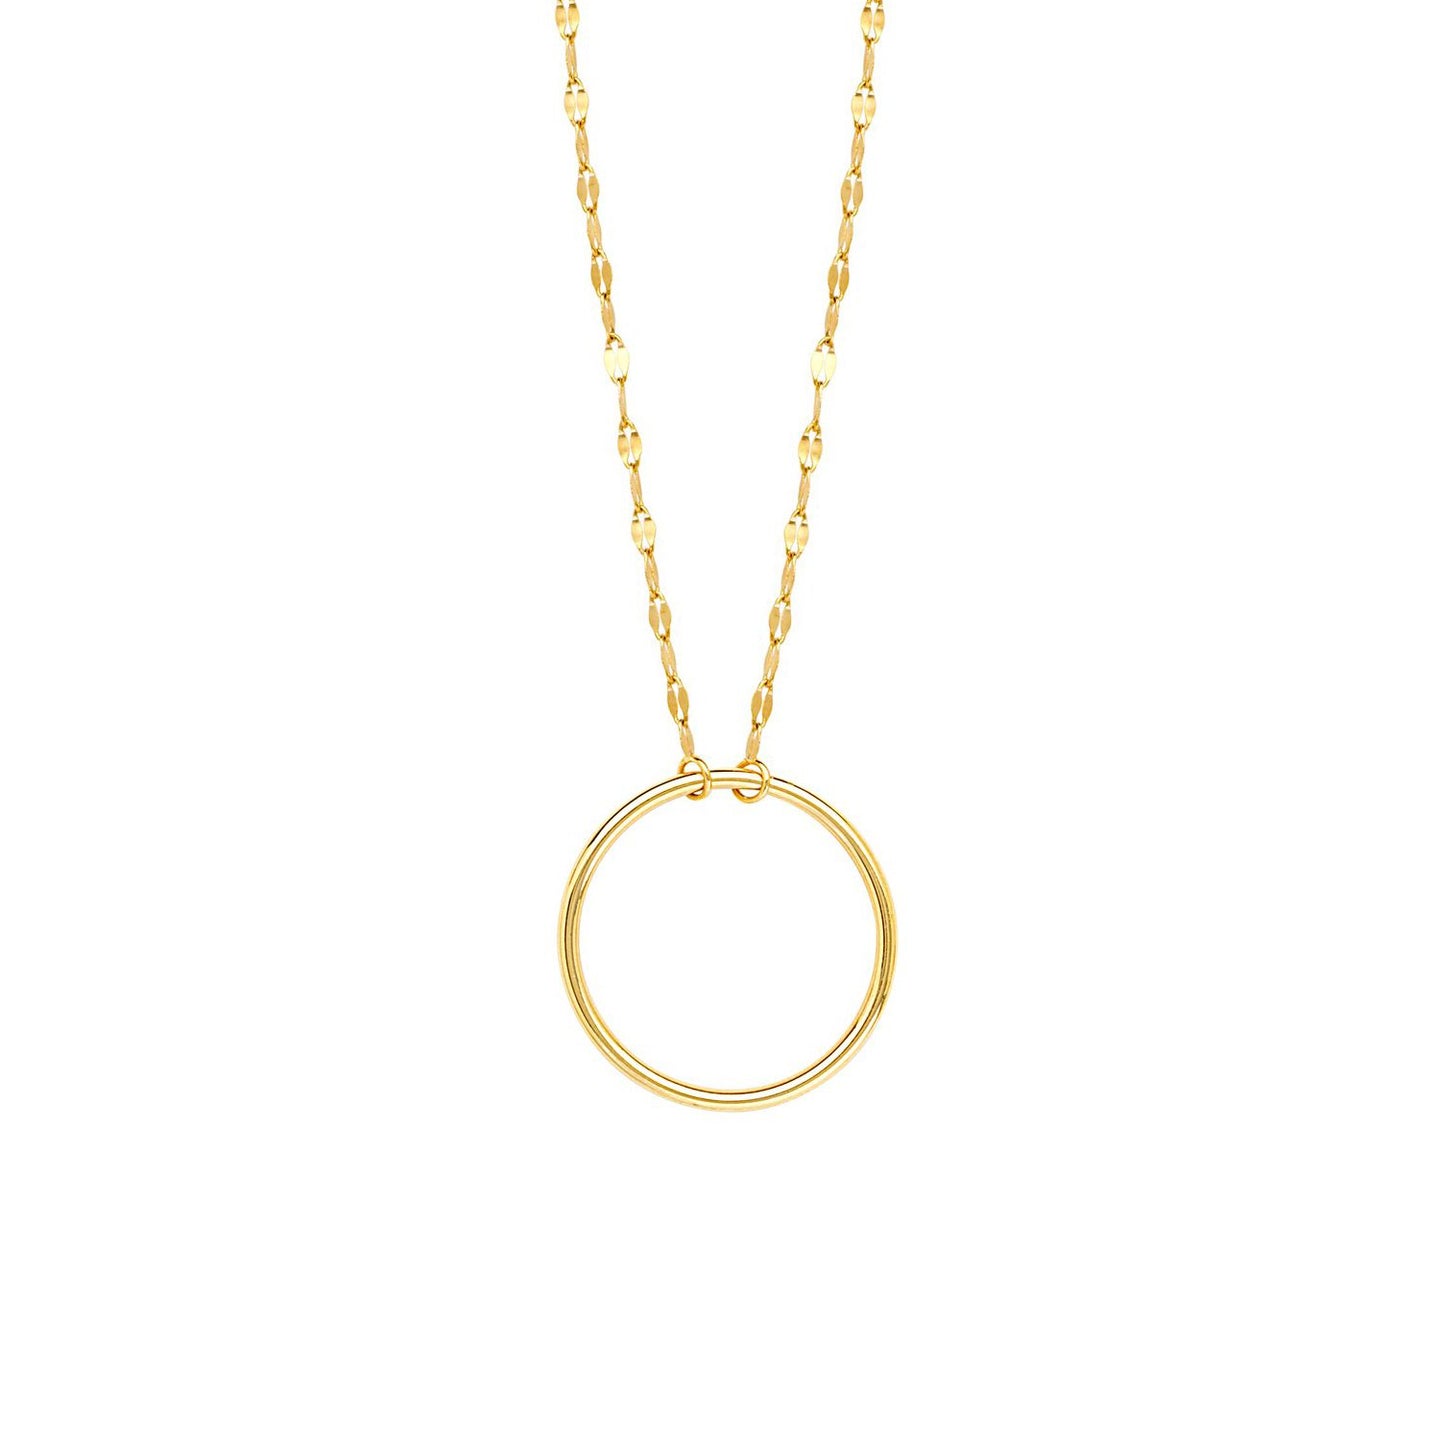 Sabel Everyday Collection 14K Yellow Gold Circle Pendant Necklace